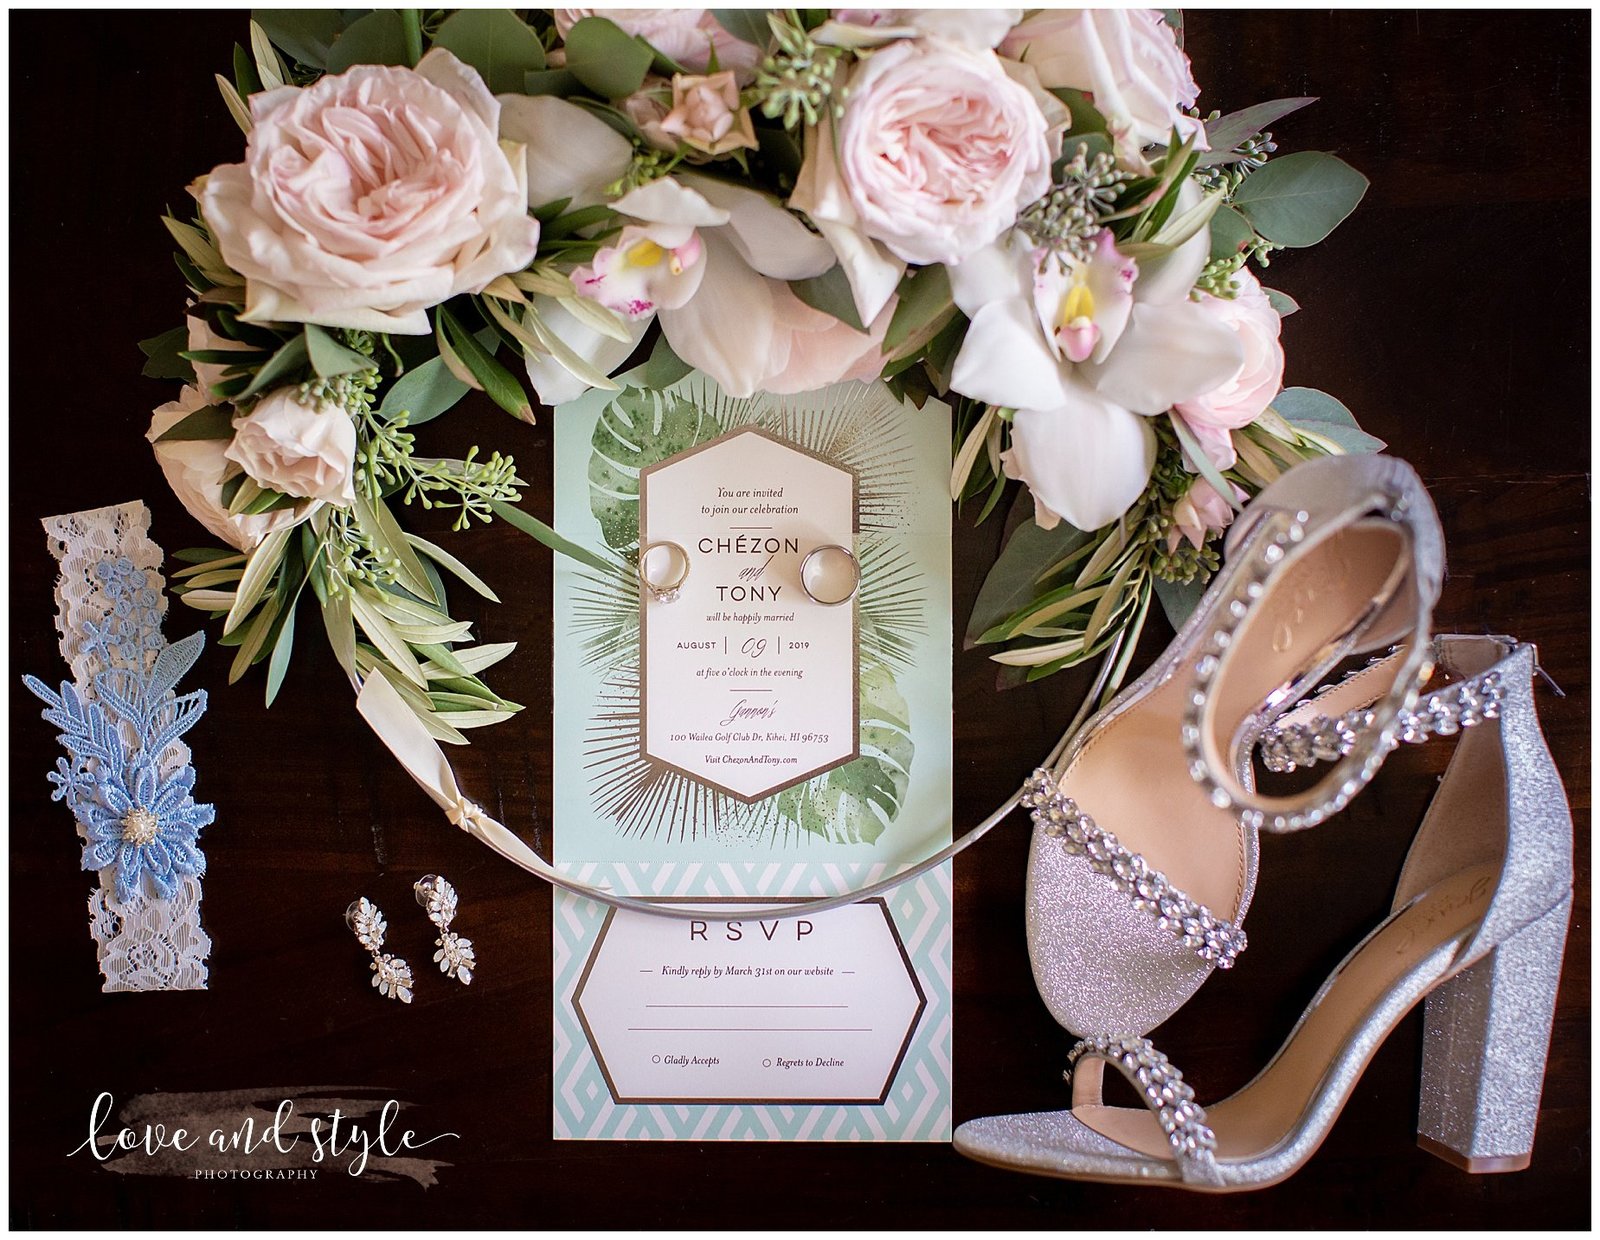 Detail shot of wedding invitation with shoes and jewelry